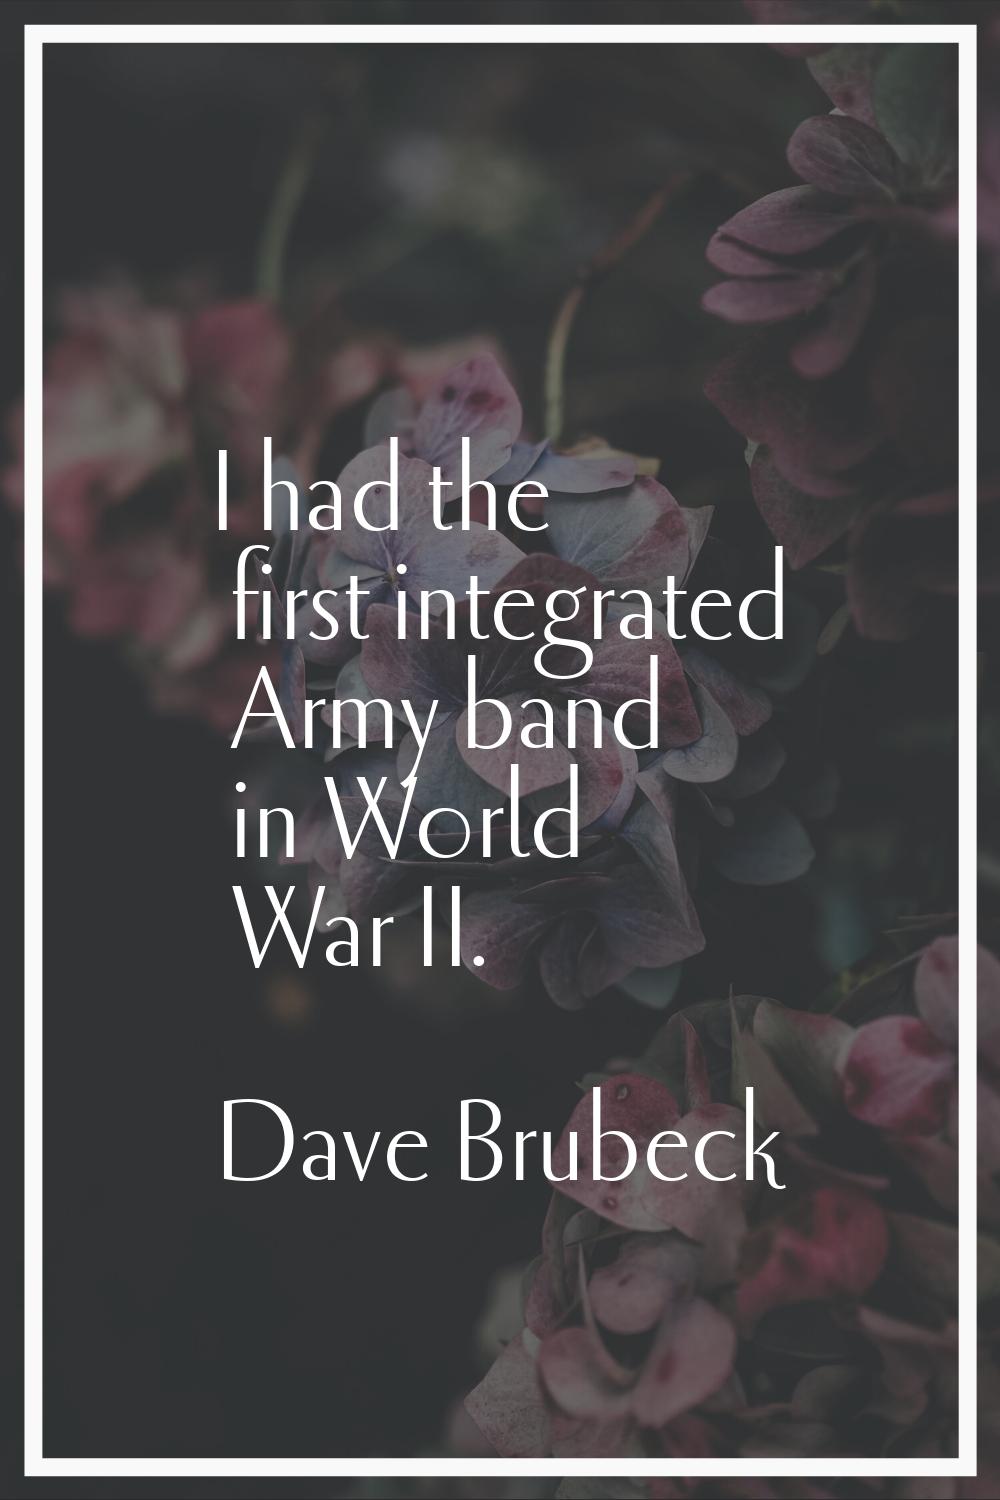 I had the first integrated Army band in World War II.